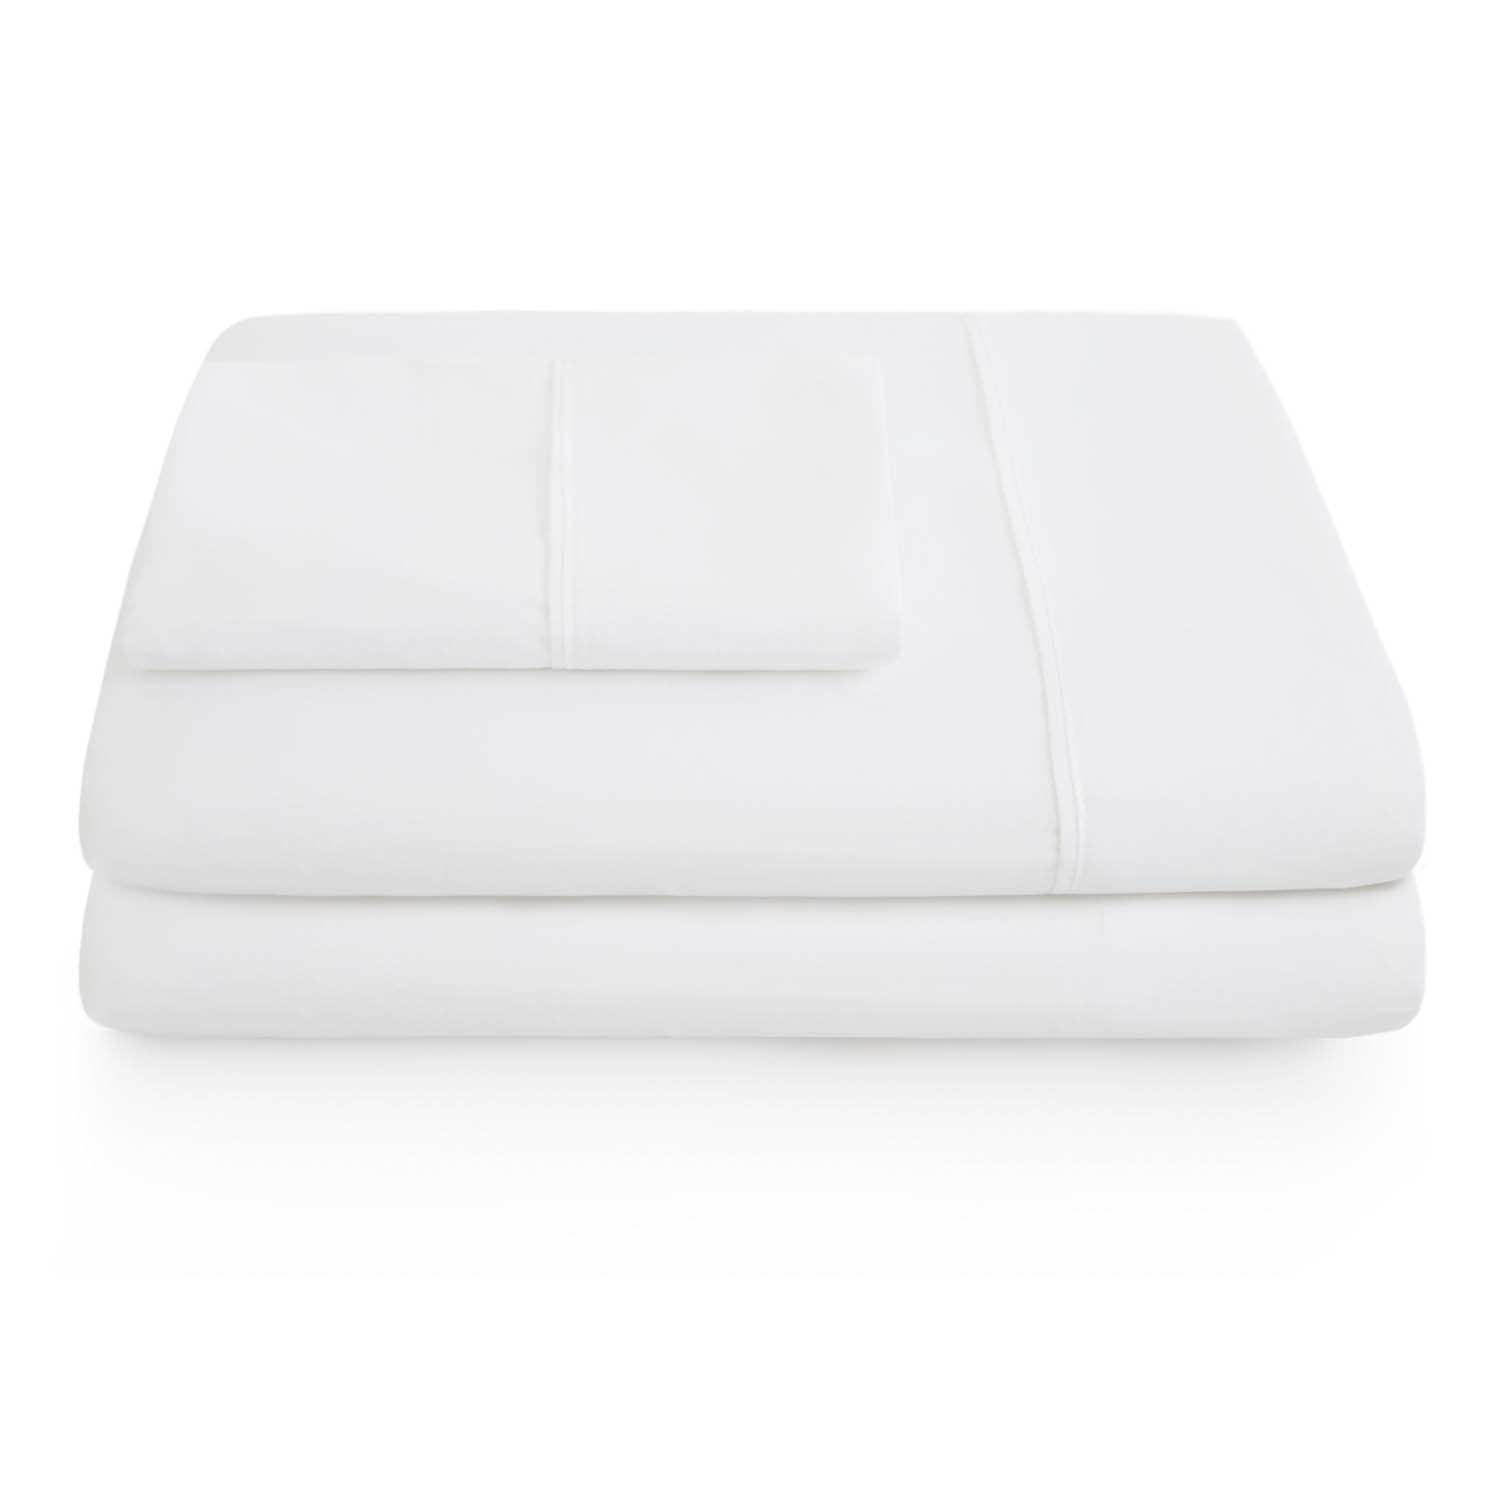 Microfiber Deep Pocket Fitted Sheet Bed Sheet for Luxury Hotel